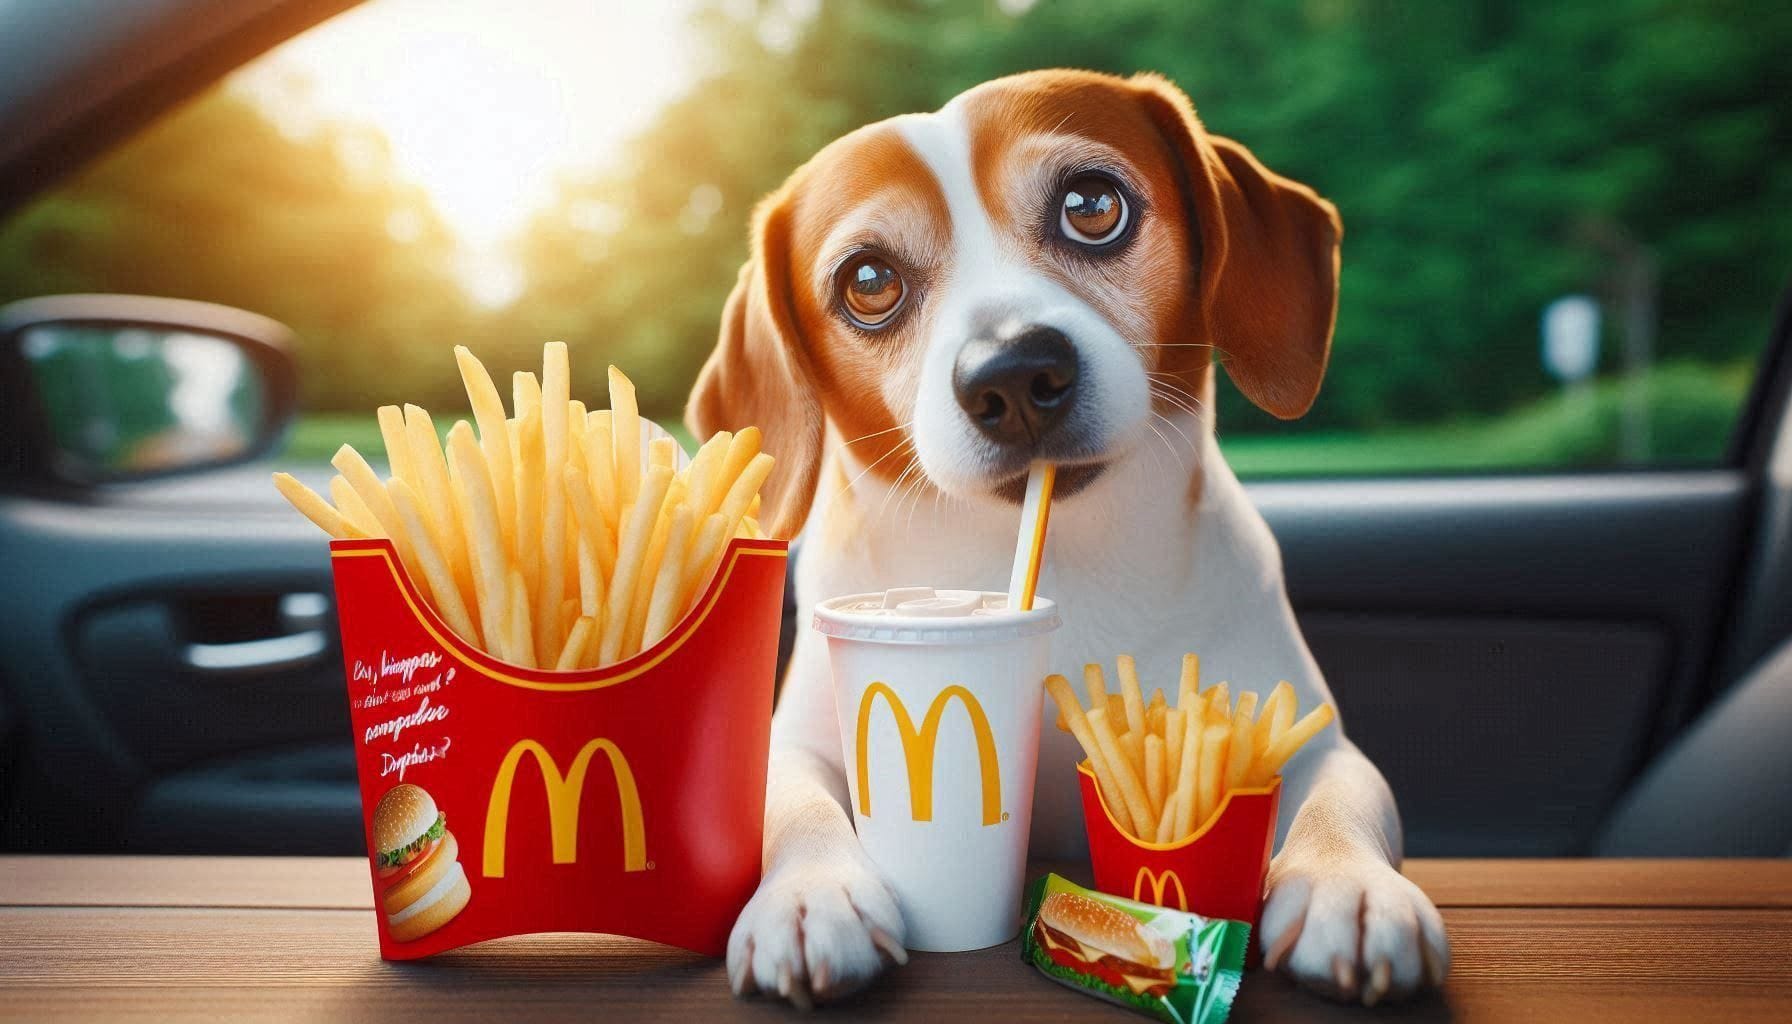 A Dog Eating McDonald's French Fries